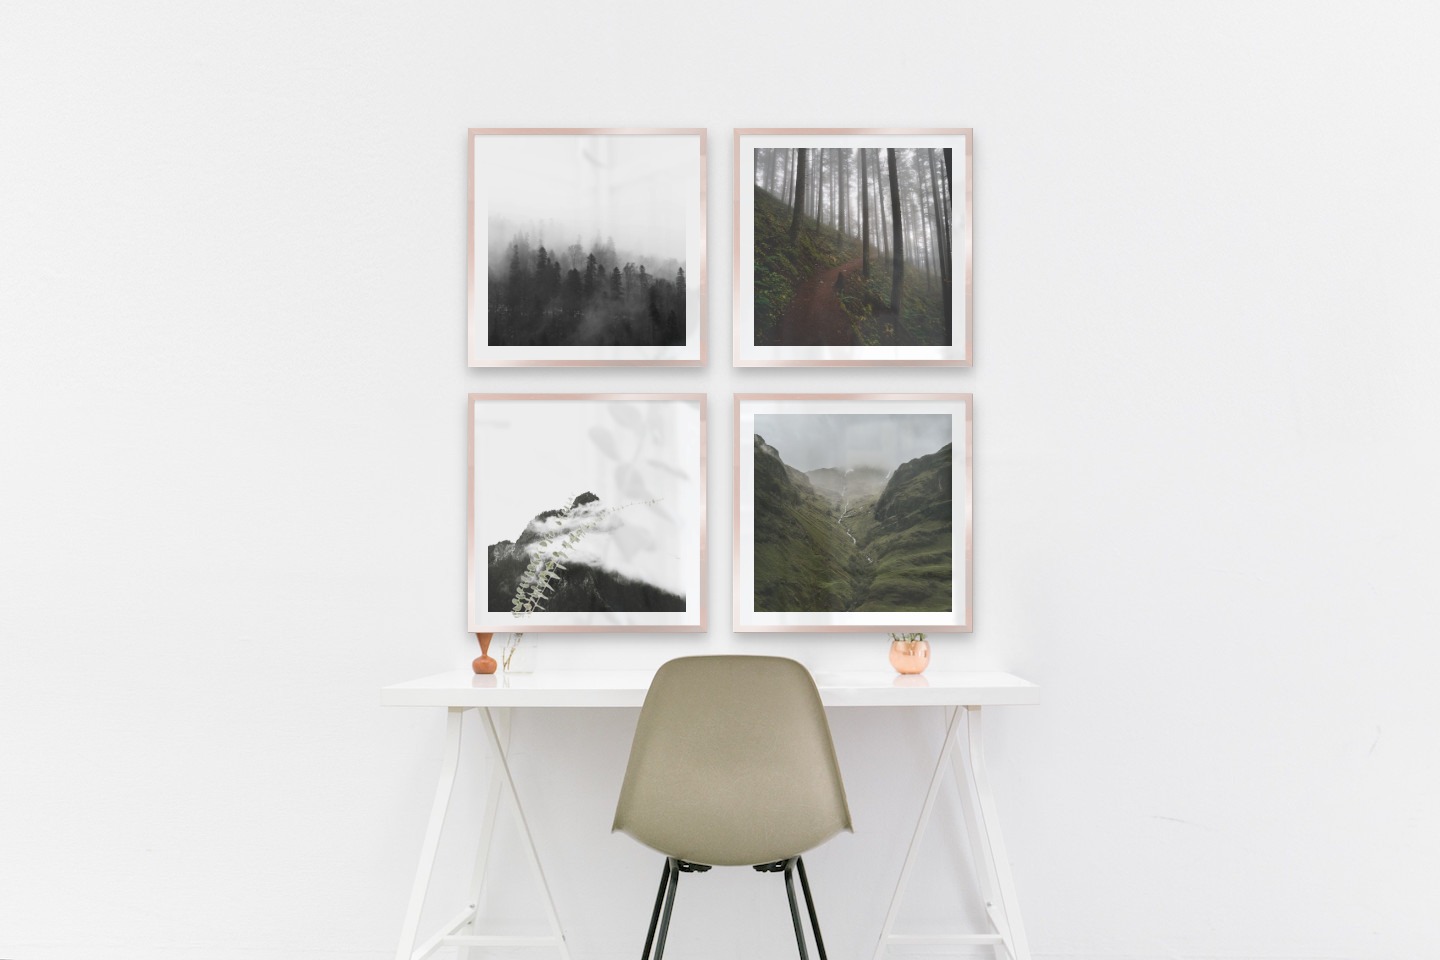 Gallery wall with picture frames in copper in sizes 50x50 with prints "Foggy wooden tops", "Forest road", "Mountain peaks in fog" and "Stream in valley"